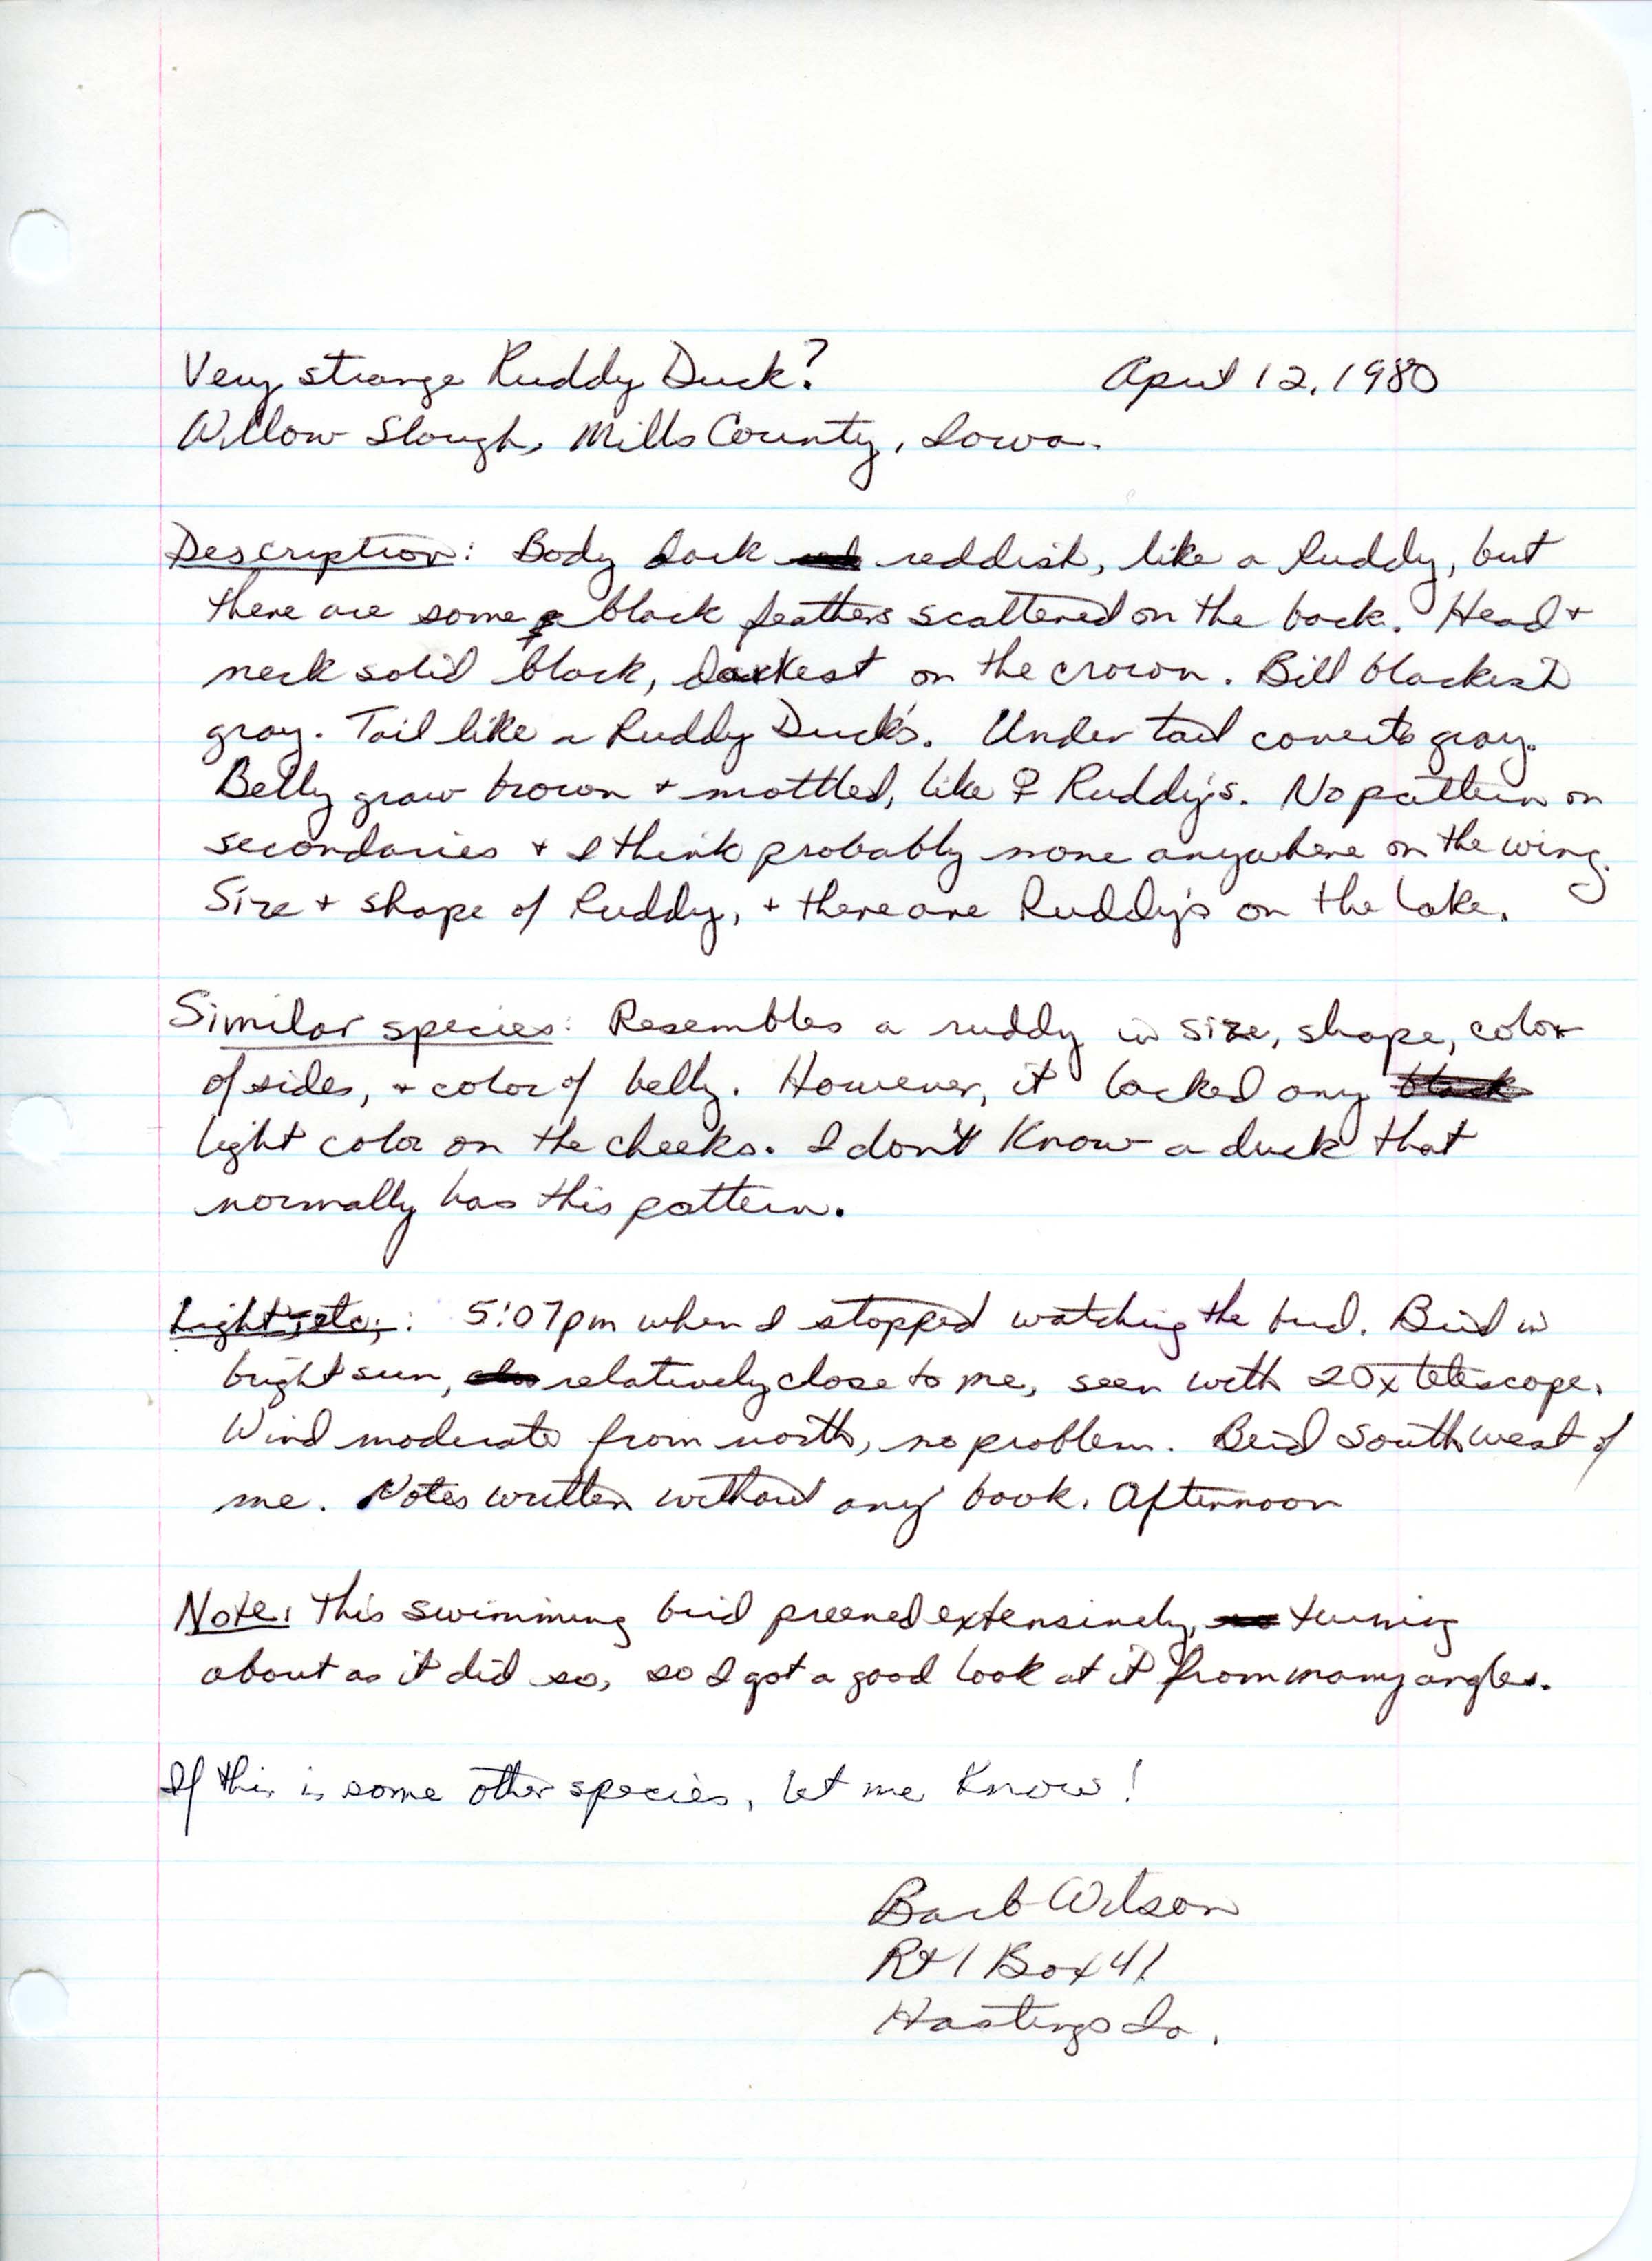 Rare bird documentation form for Ruddy Duck at Willow Slough, 1980